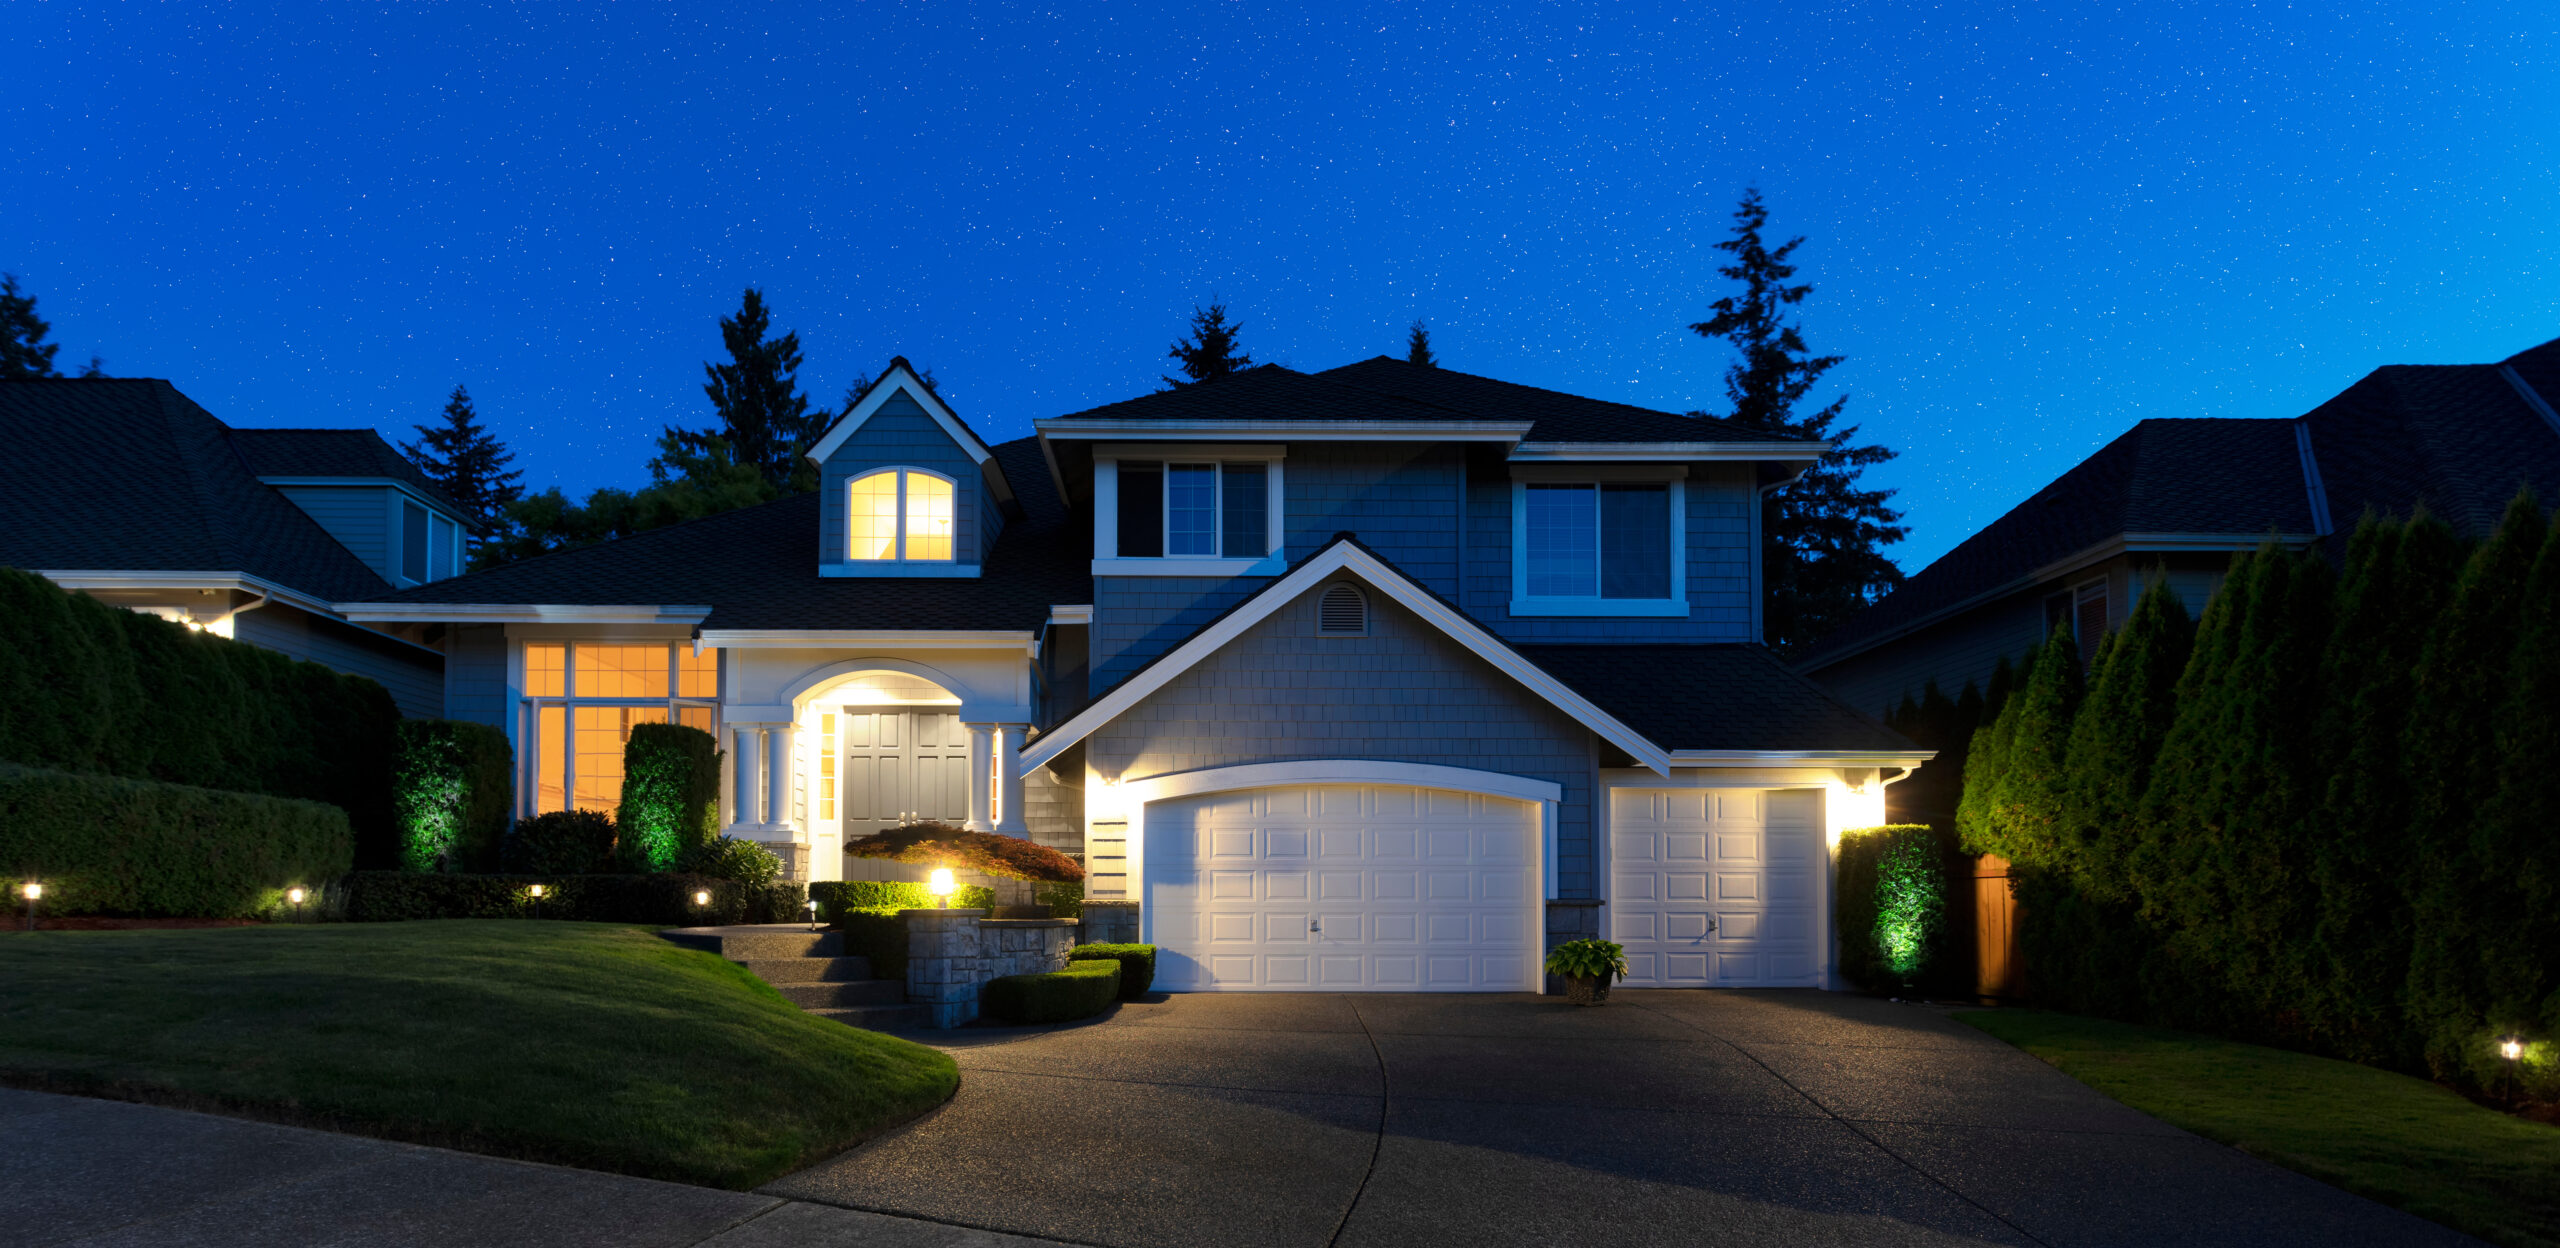 adequate outdoor lighting is one way to protect your home against invasion and burglary